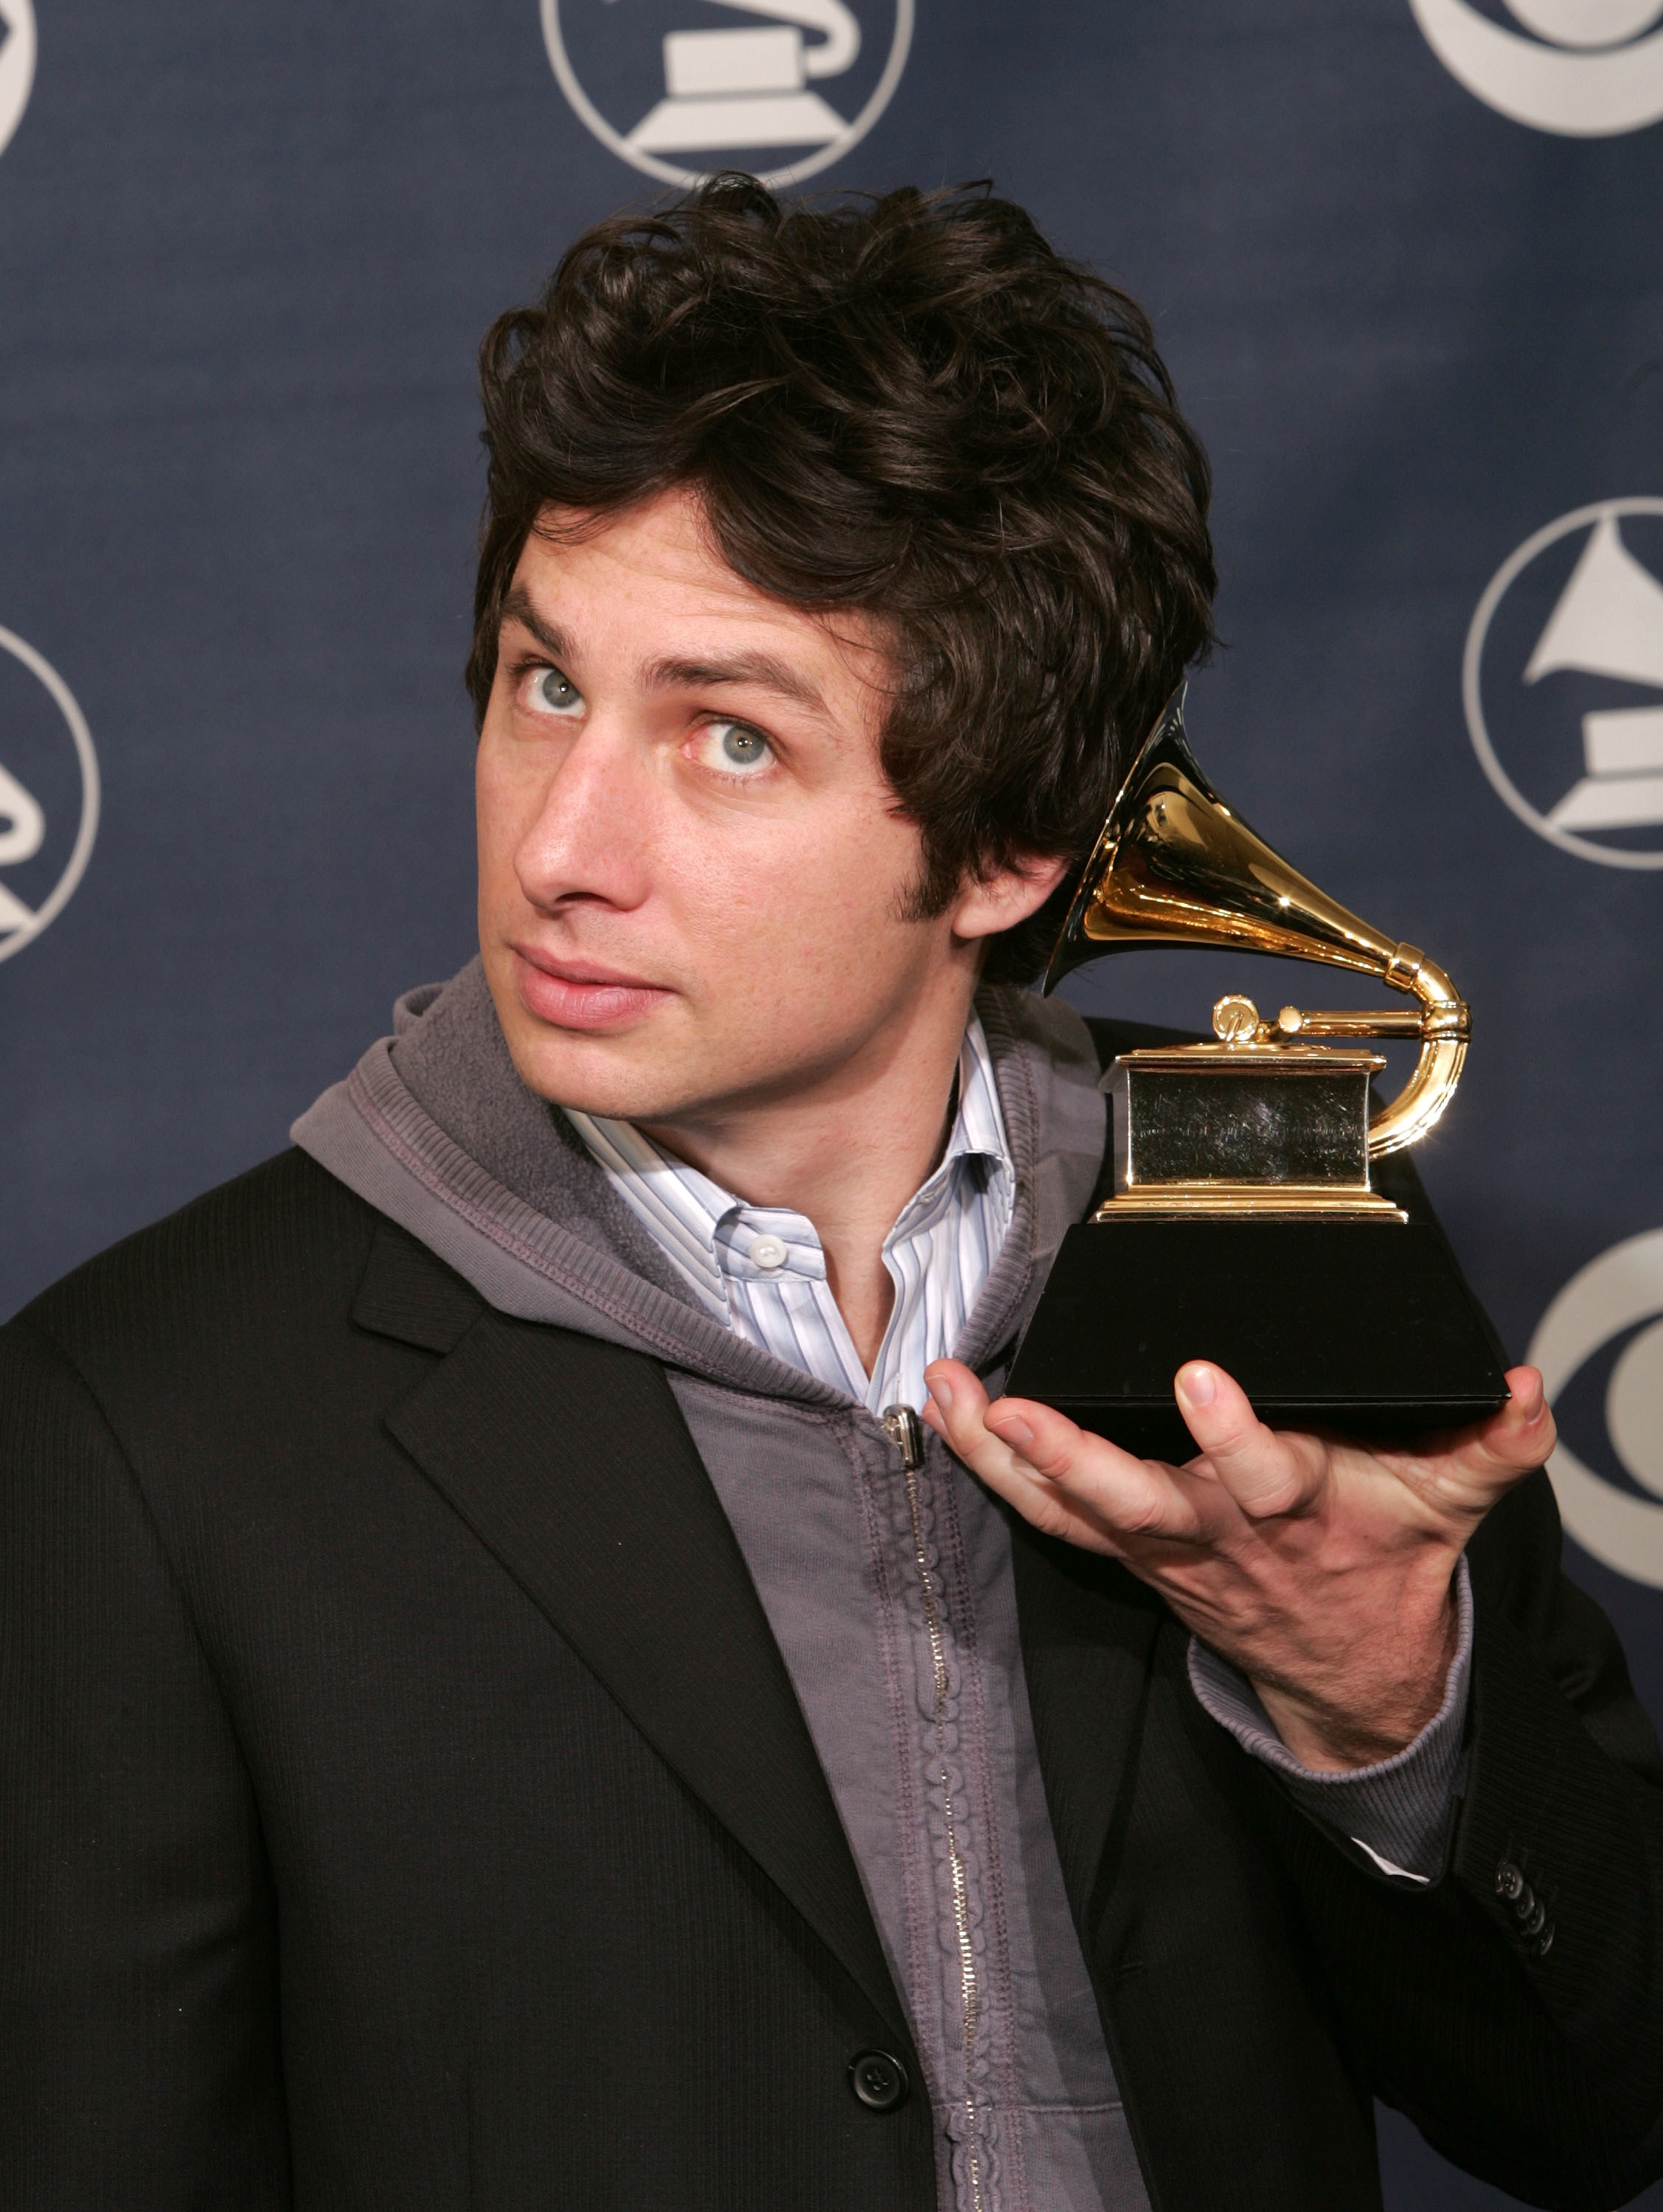 Zach Braff holds his award to his ear like a seashell